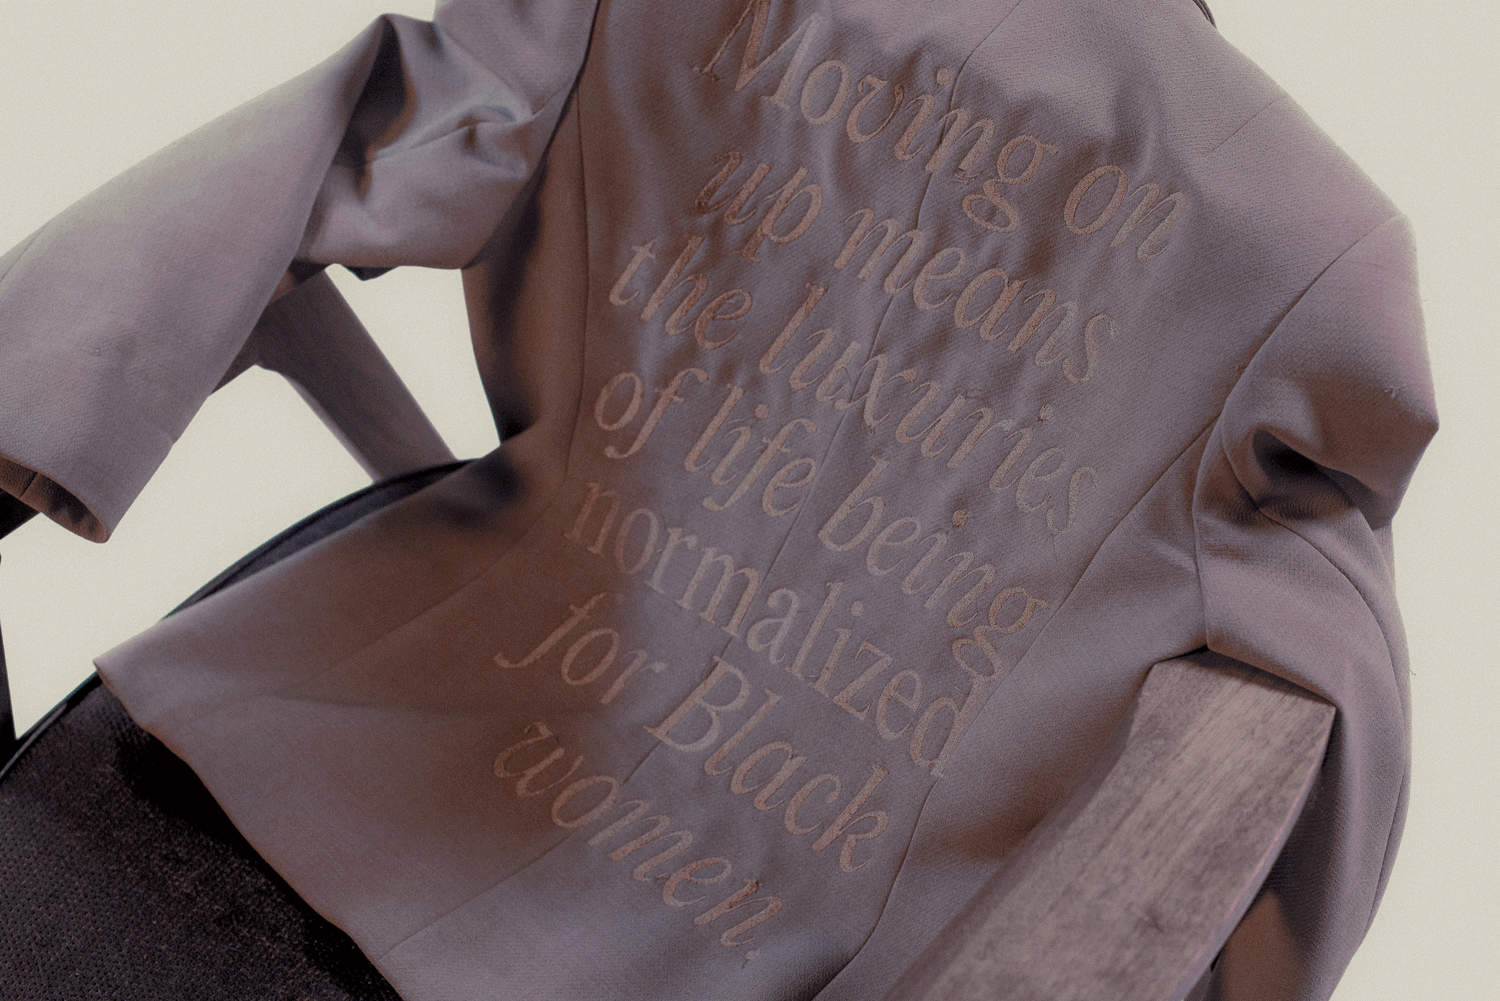 Textile blazers hung over a chair with embroidered text